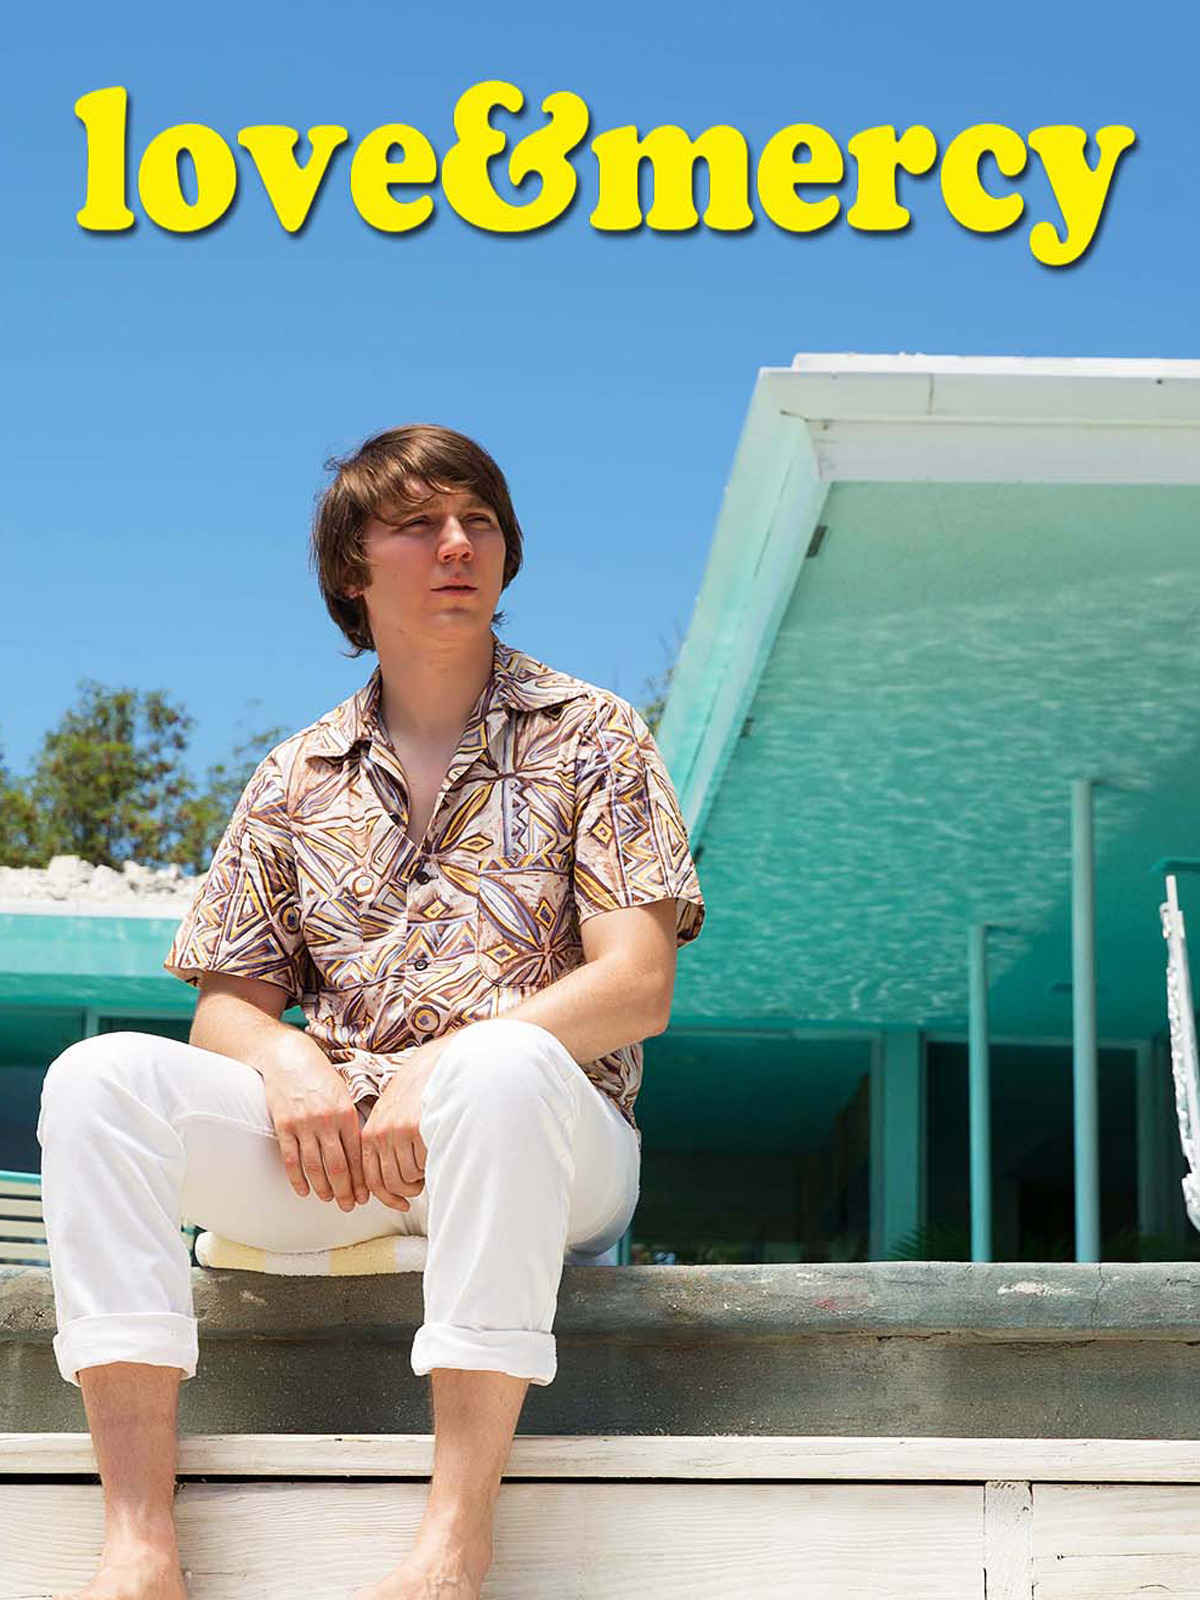 watch love and mercy full movie